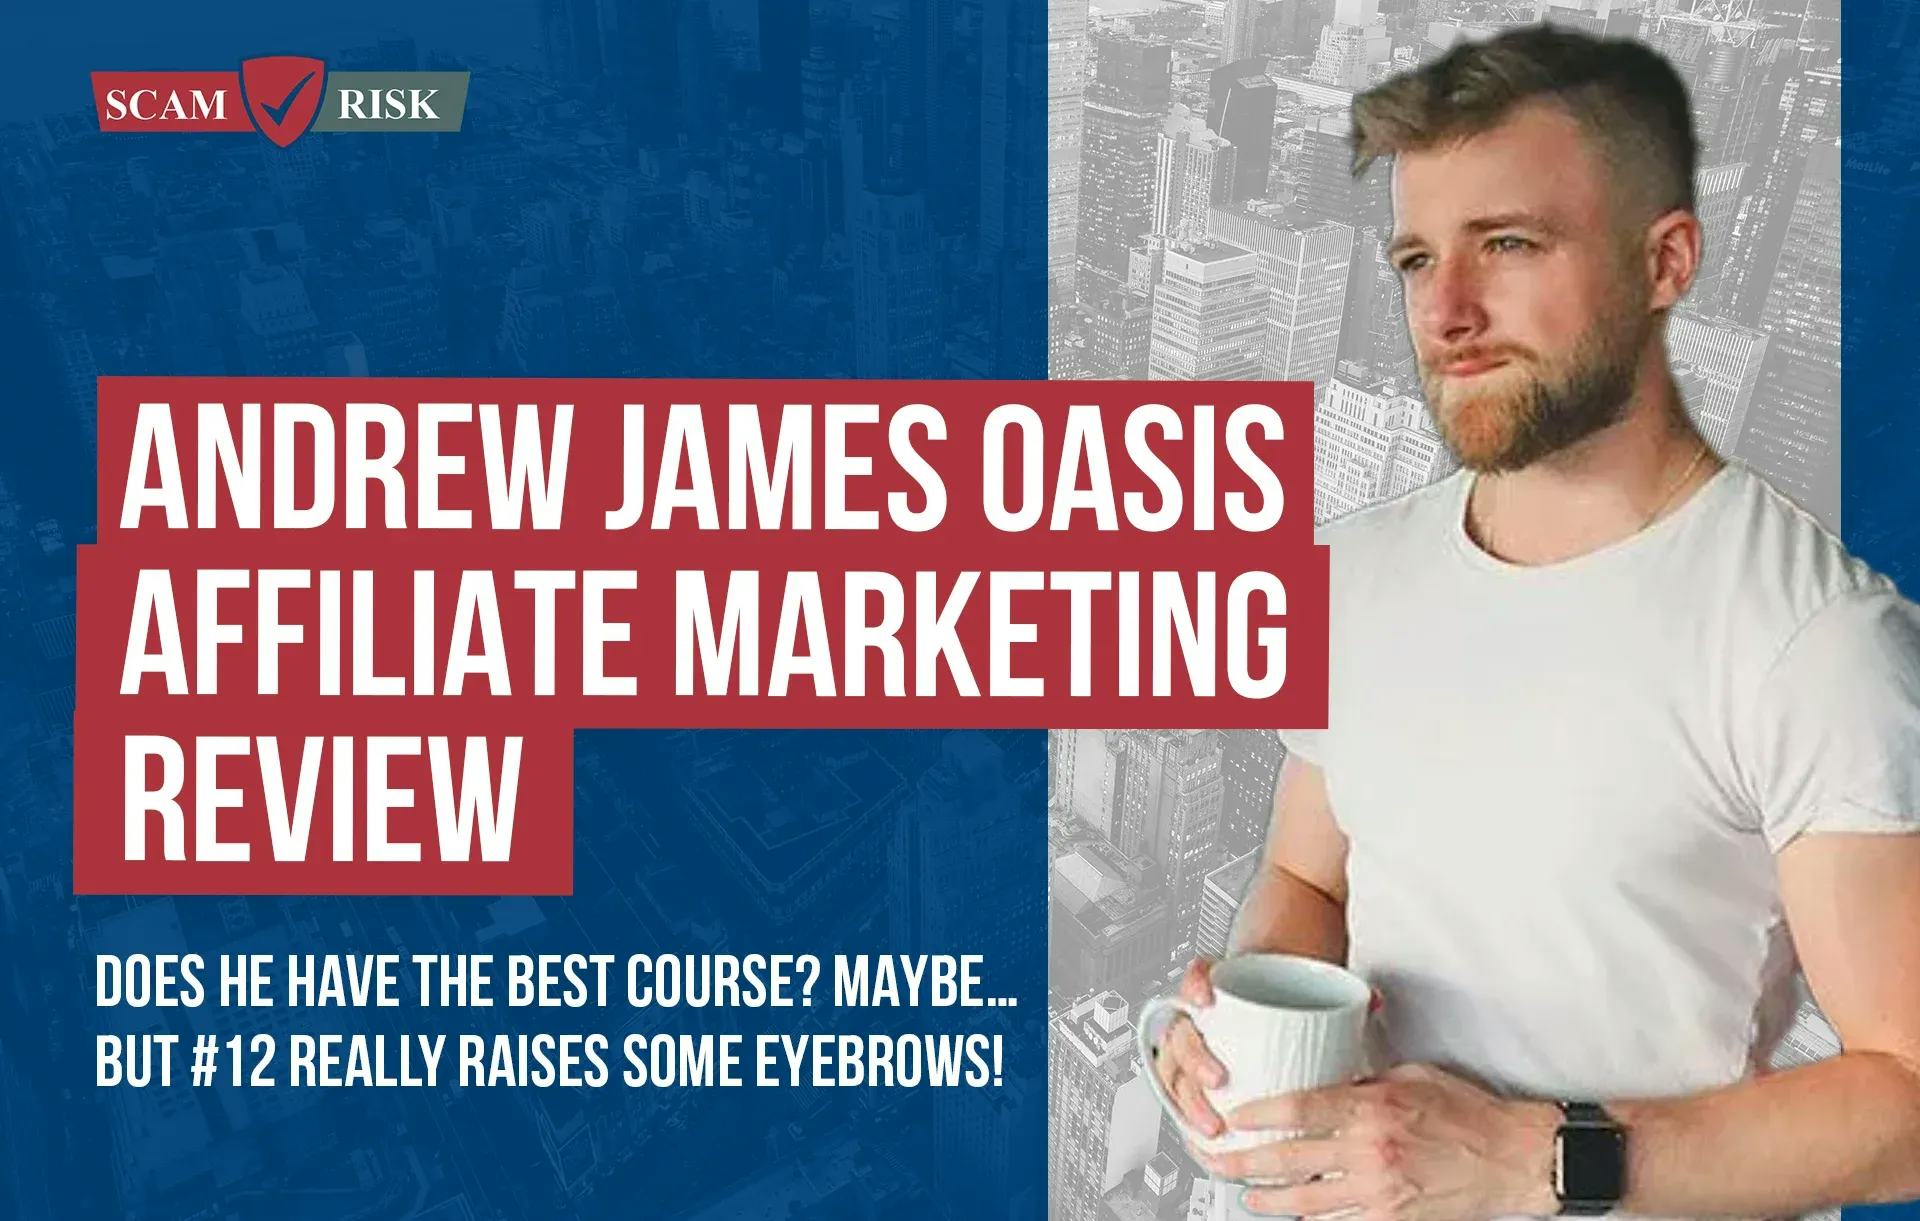 Oasis Affiliate Marketing Reviews: Best Course?